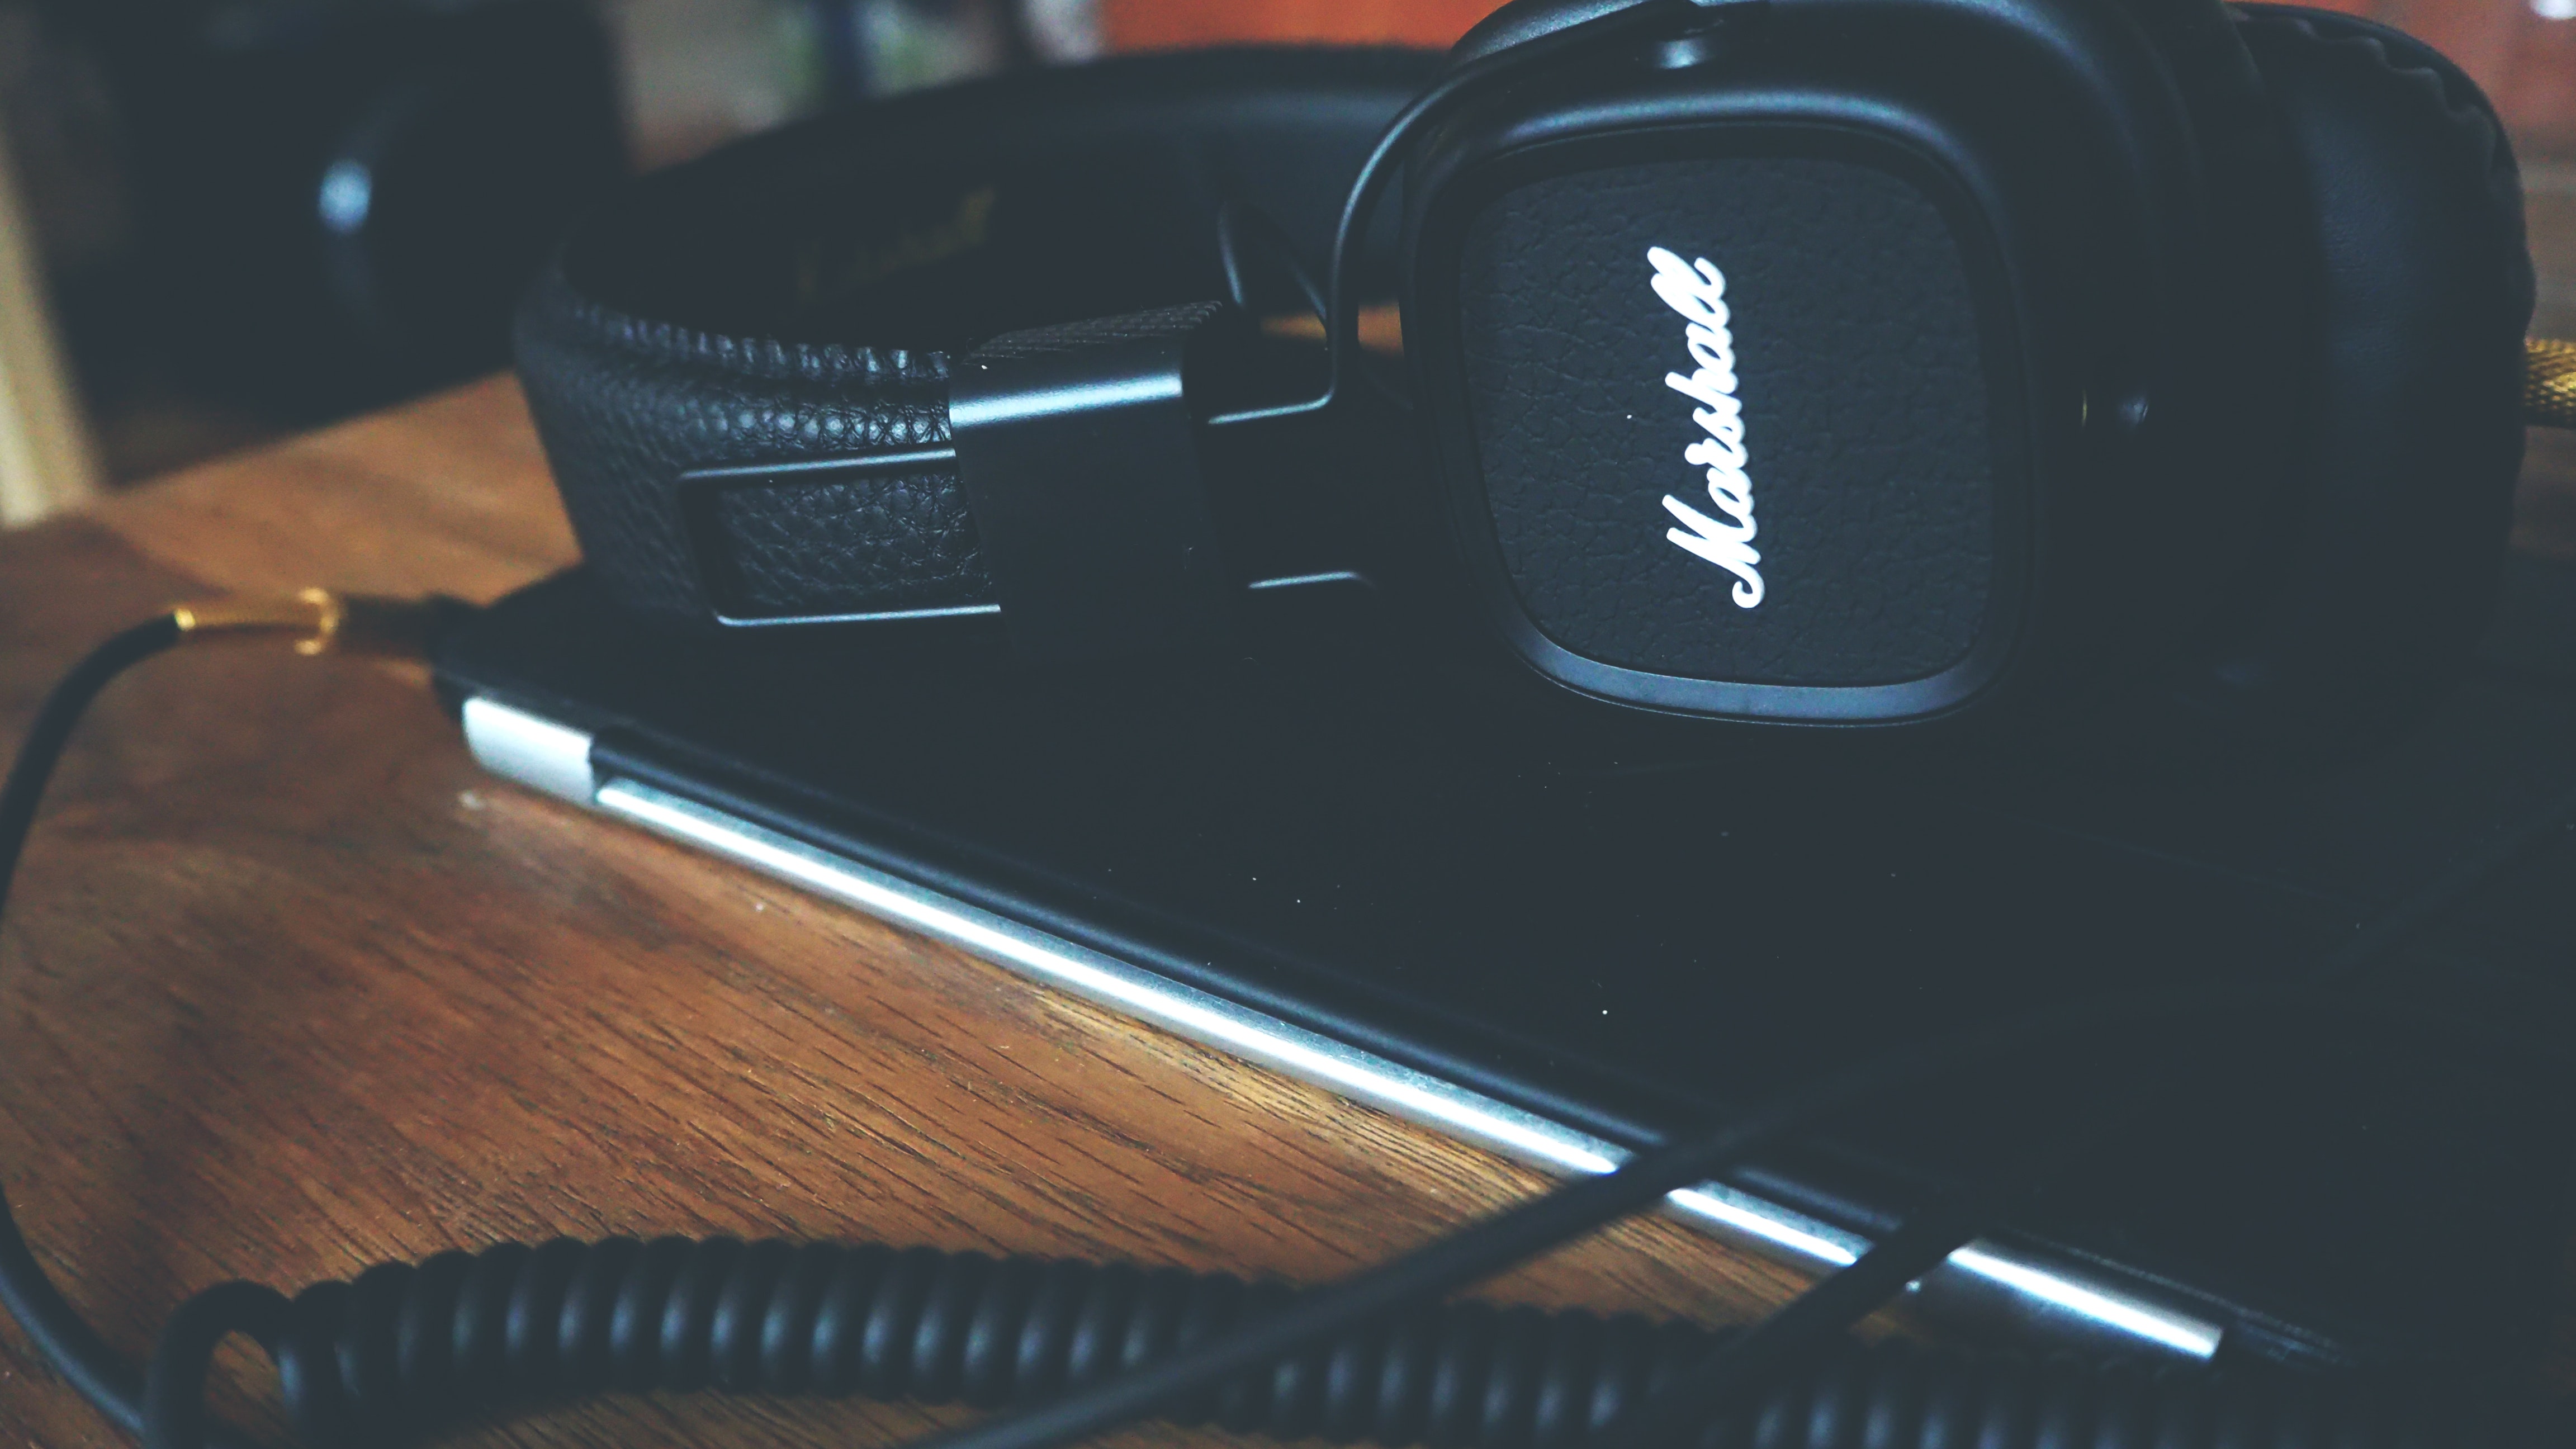 Close-up of HeadPhone, Action, Laptop, Wooden table top, Wireless, HQ Photo